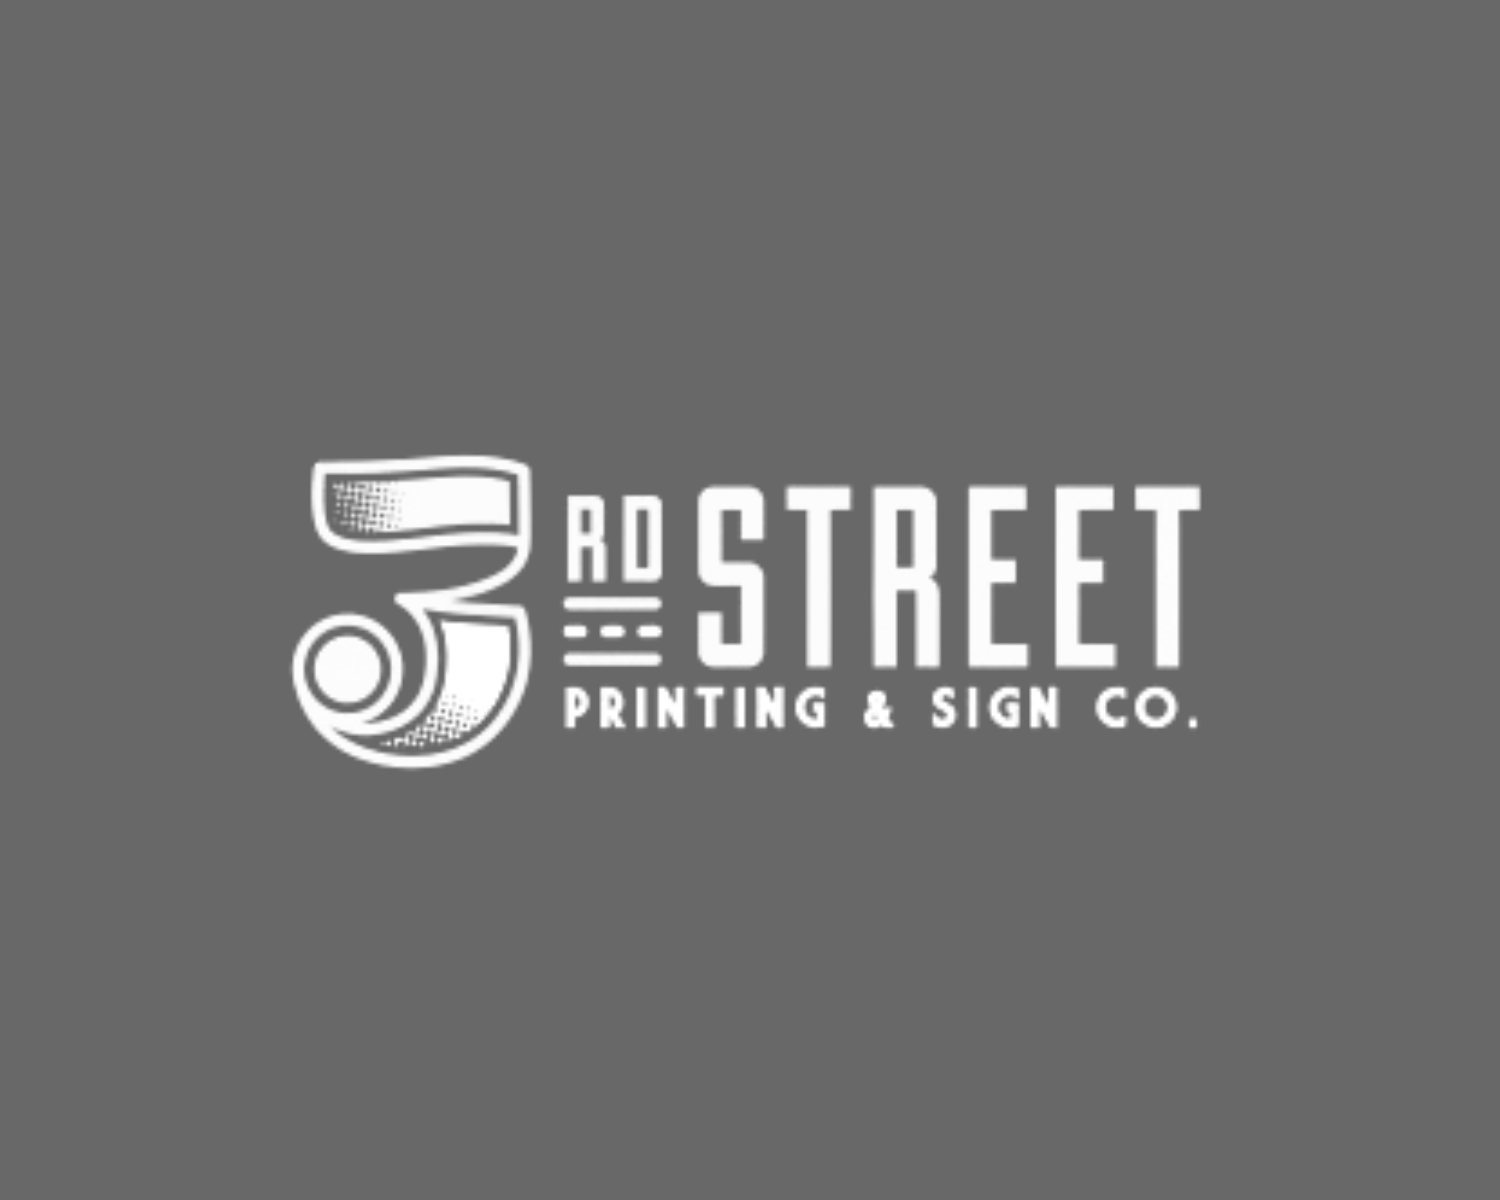 3rd Street Printing & Sign co.